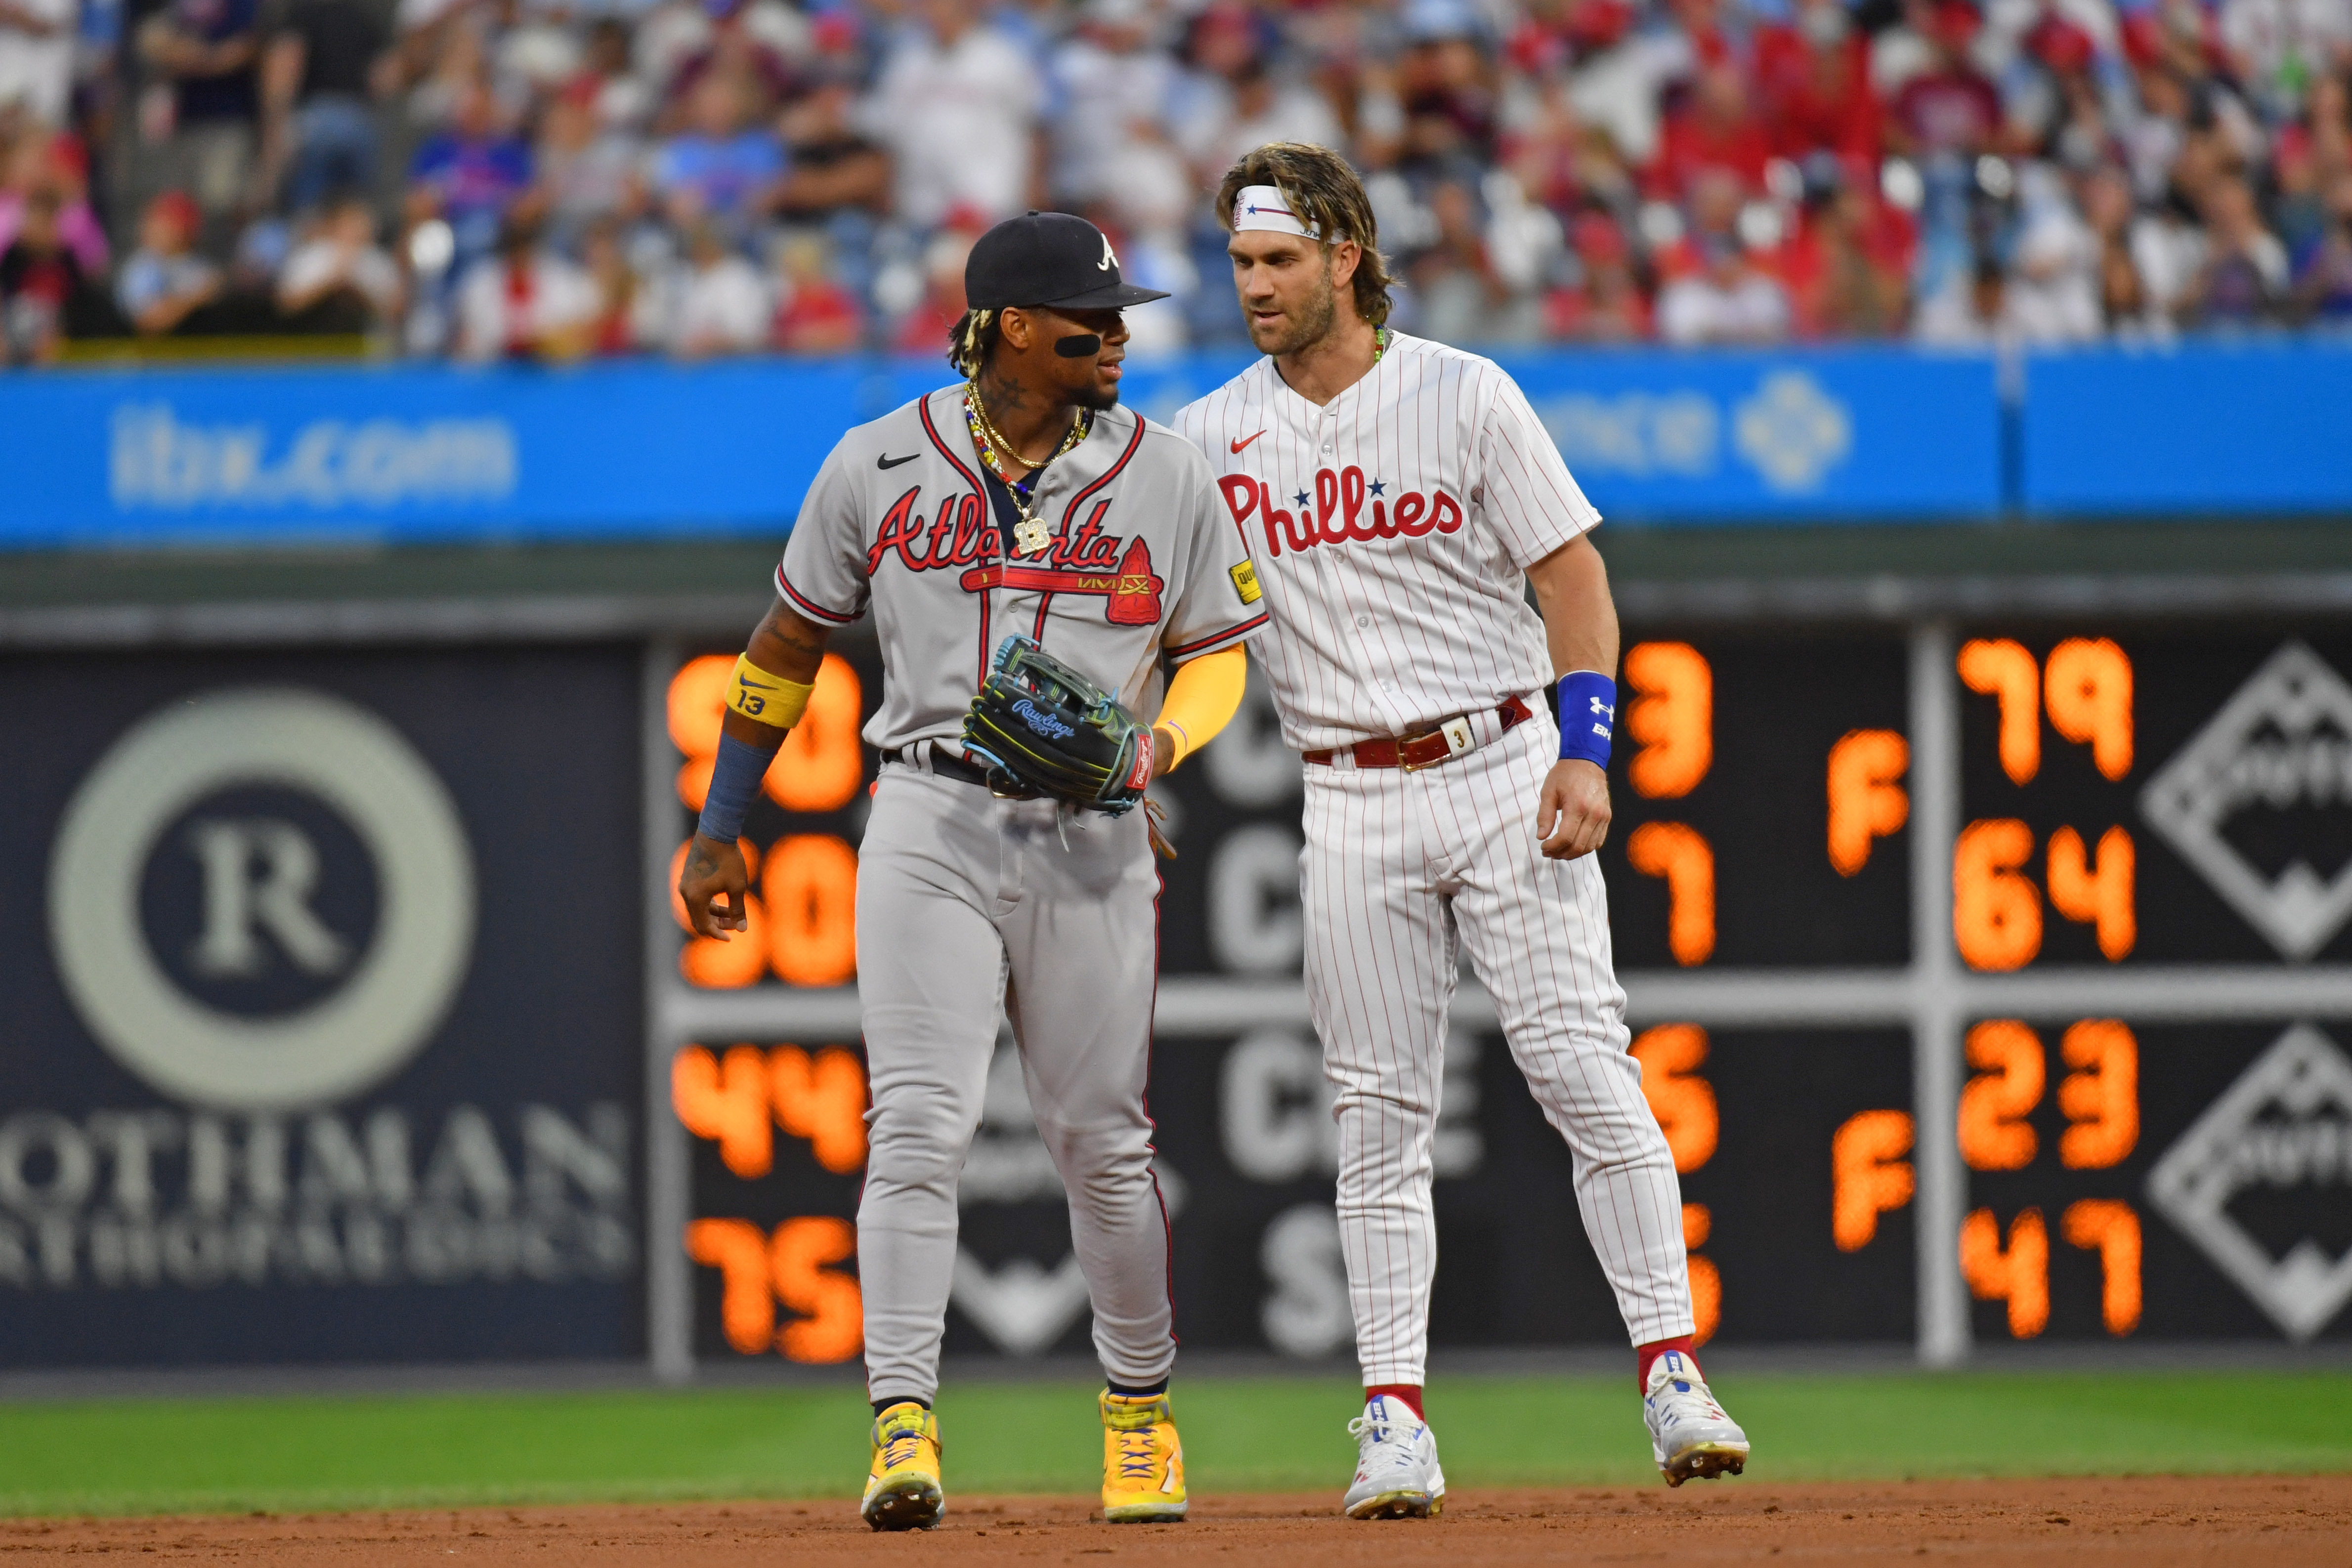 Slow start to September continues as Phillies drop 3 of 4 to